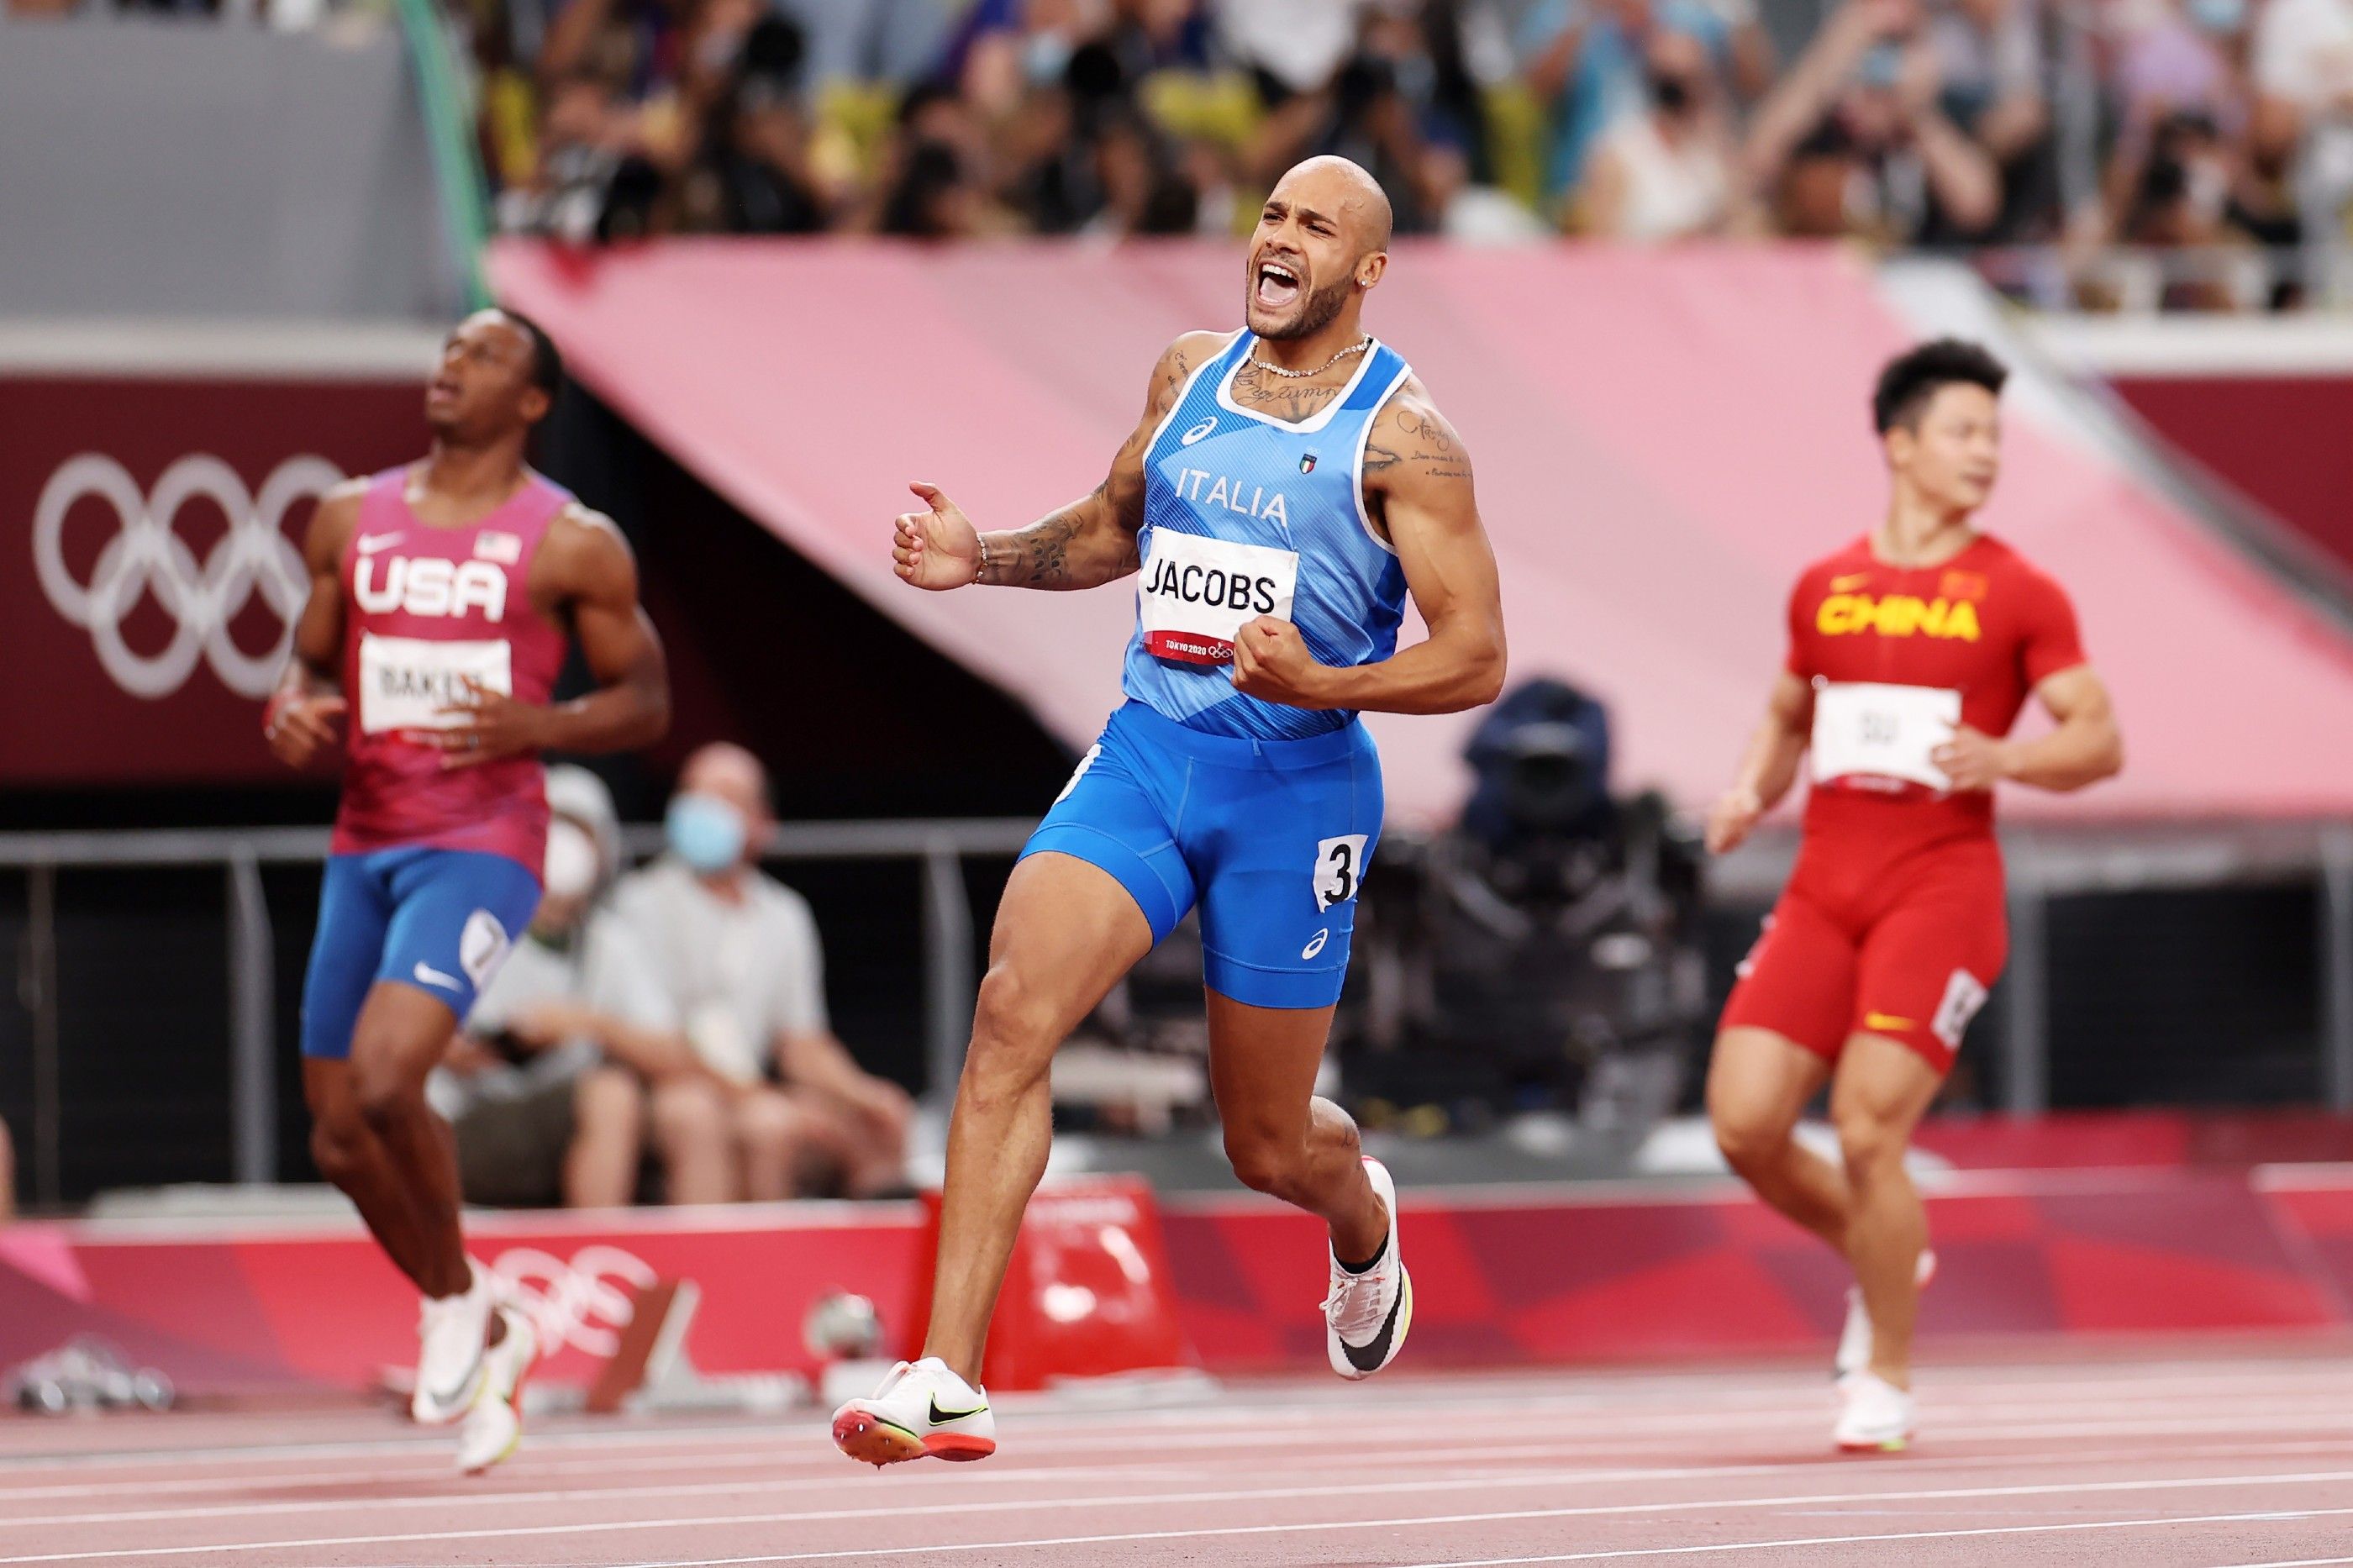 Lamont Marcell Jacobs wins 100m gold at the Tokyo 2020 Olympic Games